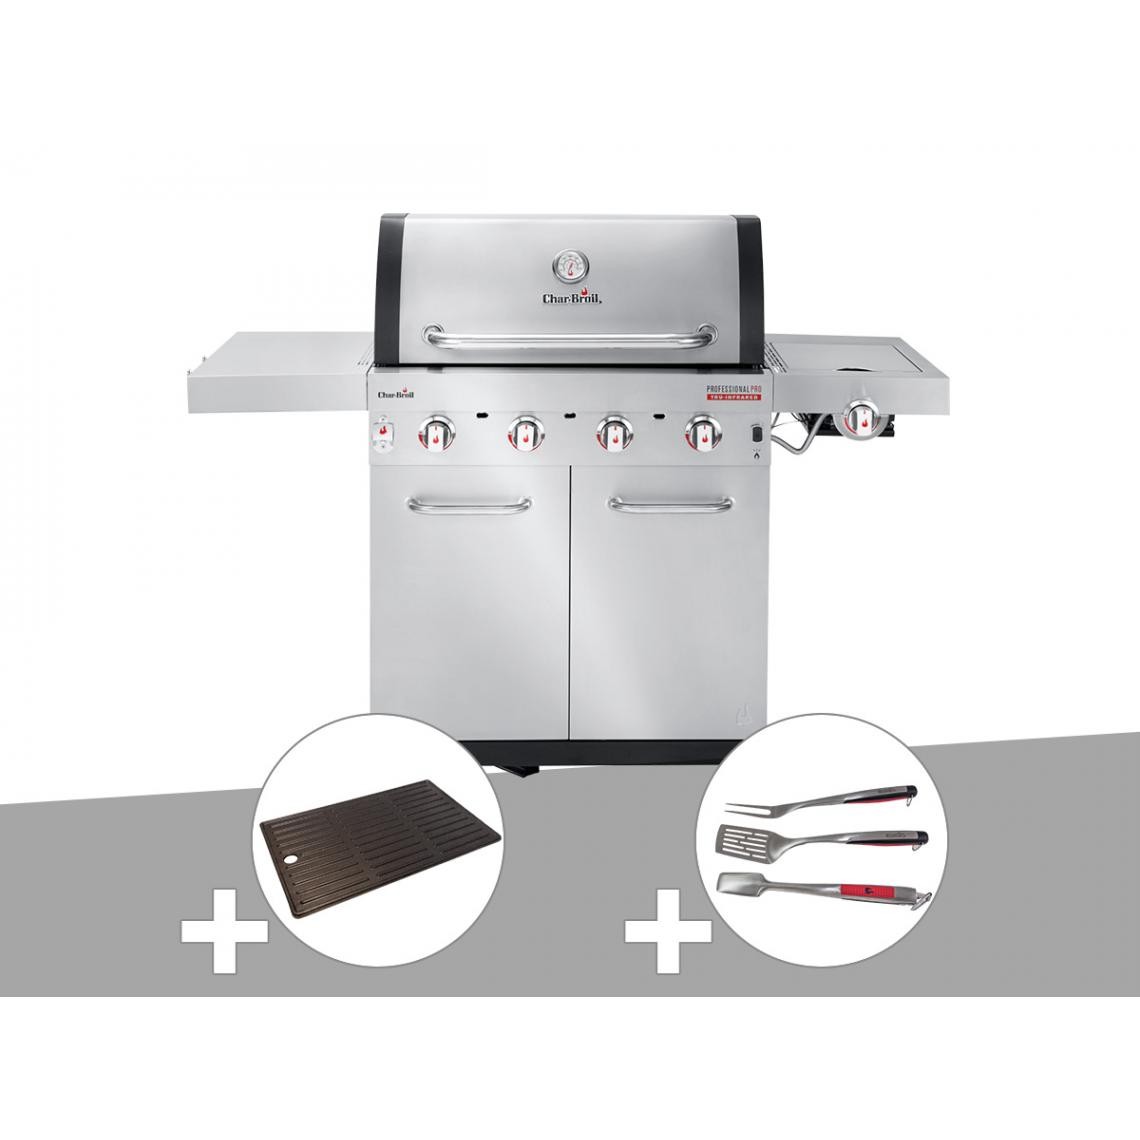 Char-Broil - Barbecue à gaz Char/Broil Professional Pro S 4 + Plancha + Kit 3 ustensiles - Barbecues gaz